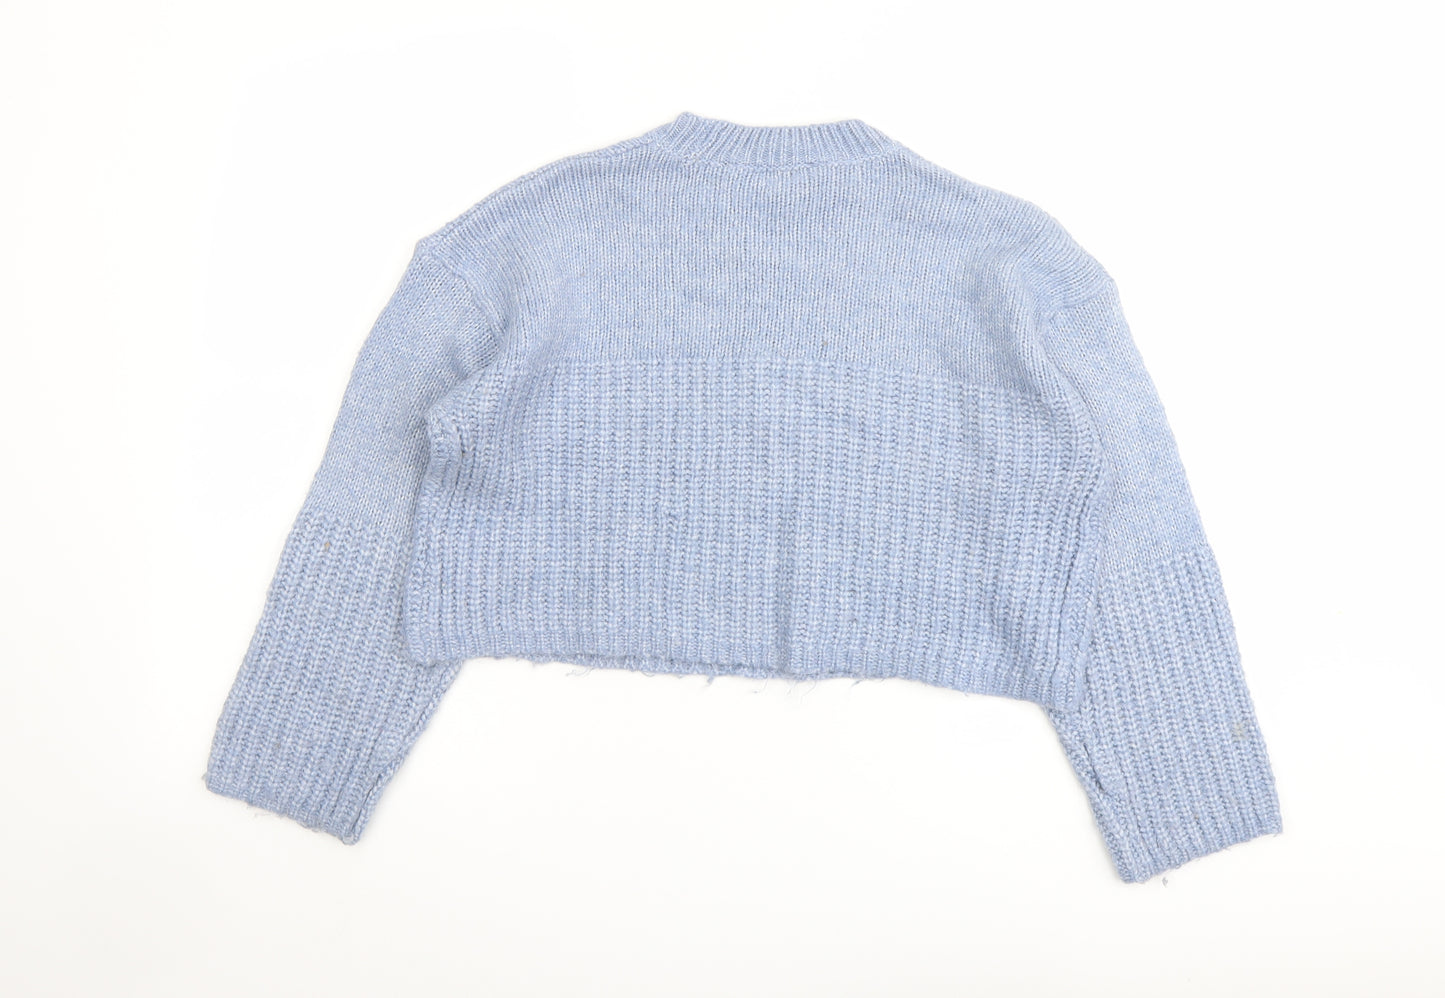 New Look Girls Blue Round Neck Acrylic Pullover Jumper Size 12-13 Years Pullover - Cropped